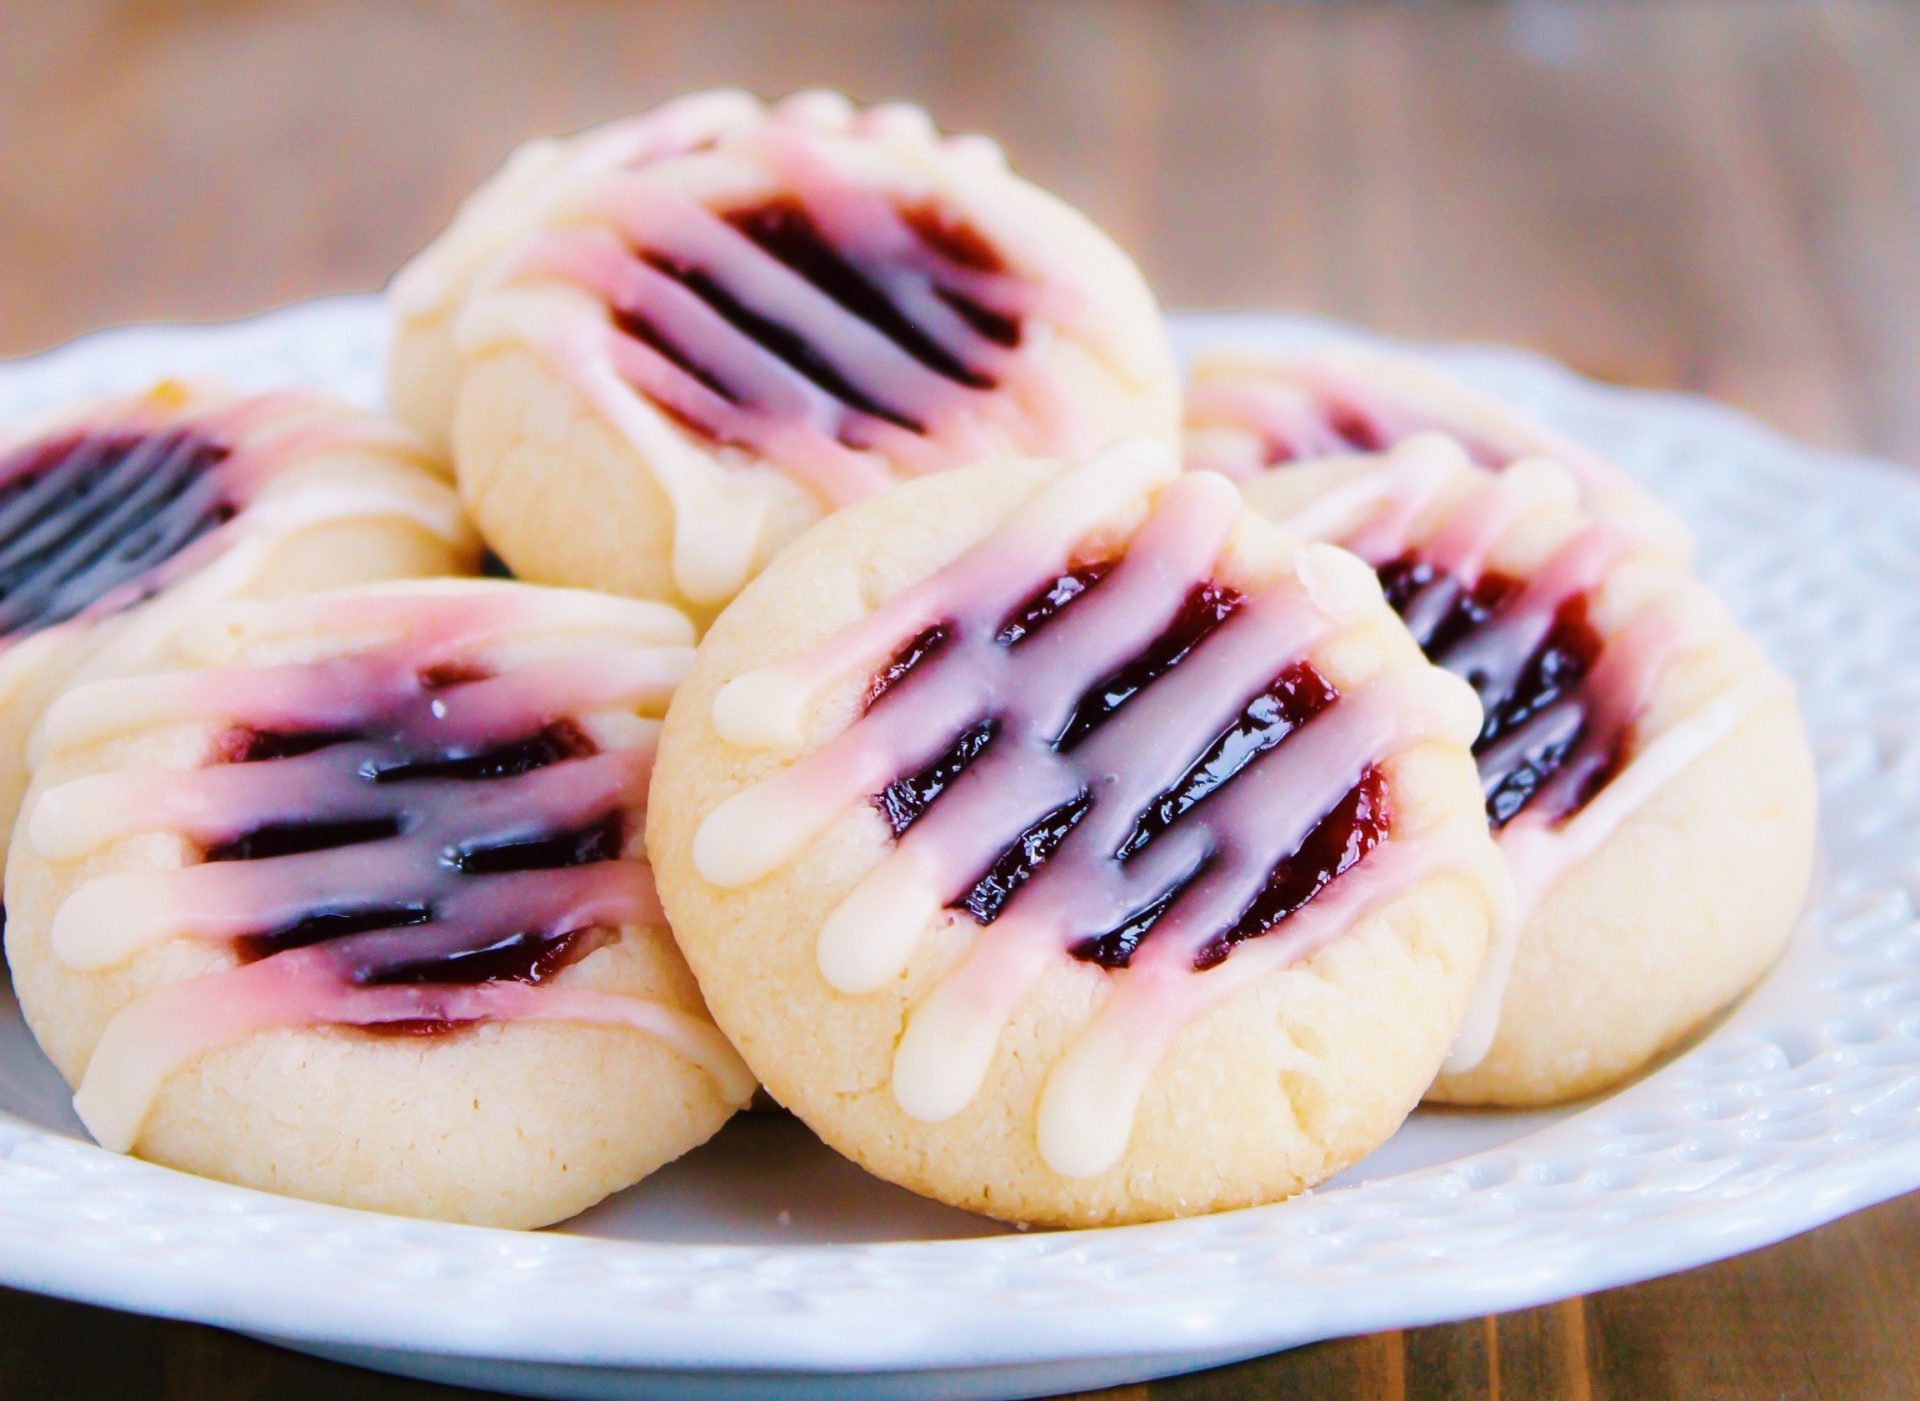 Retract the vacation baking swap with this gripping recent opt on traditional raspberry thumbprint cookies